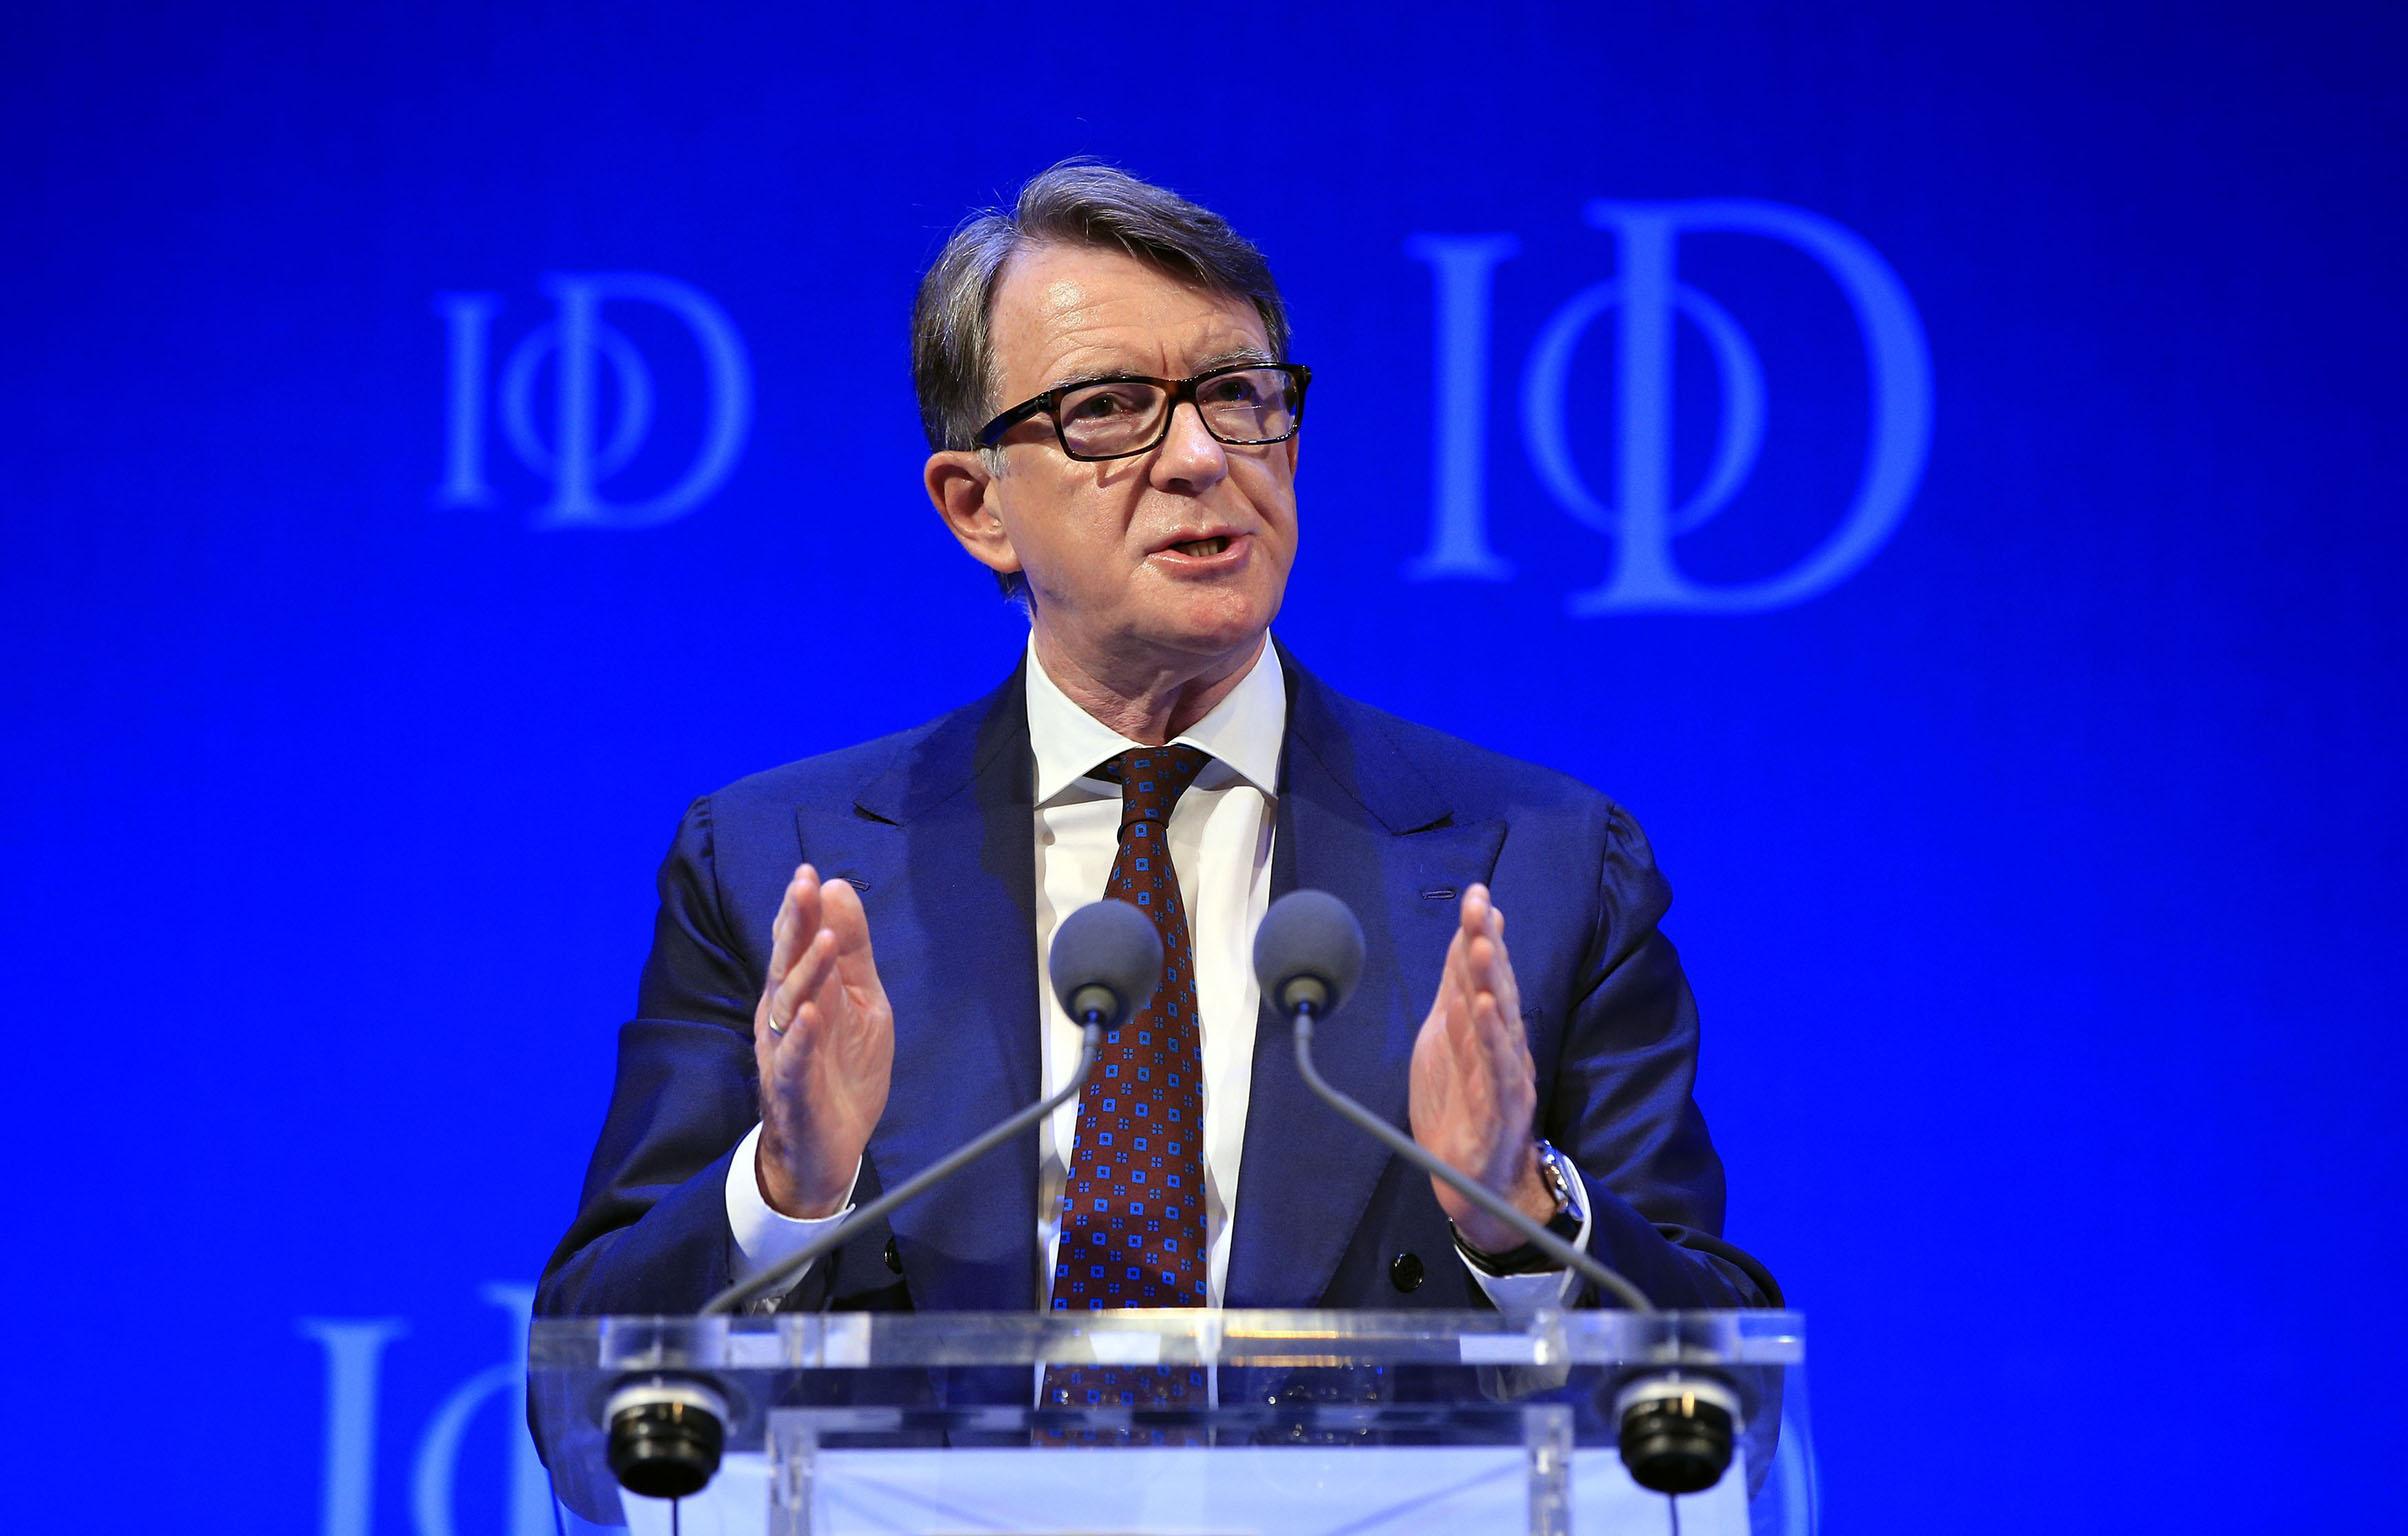 Lord Mandelson, speaking at a separate event yesterday